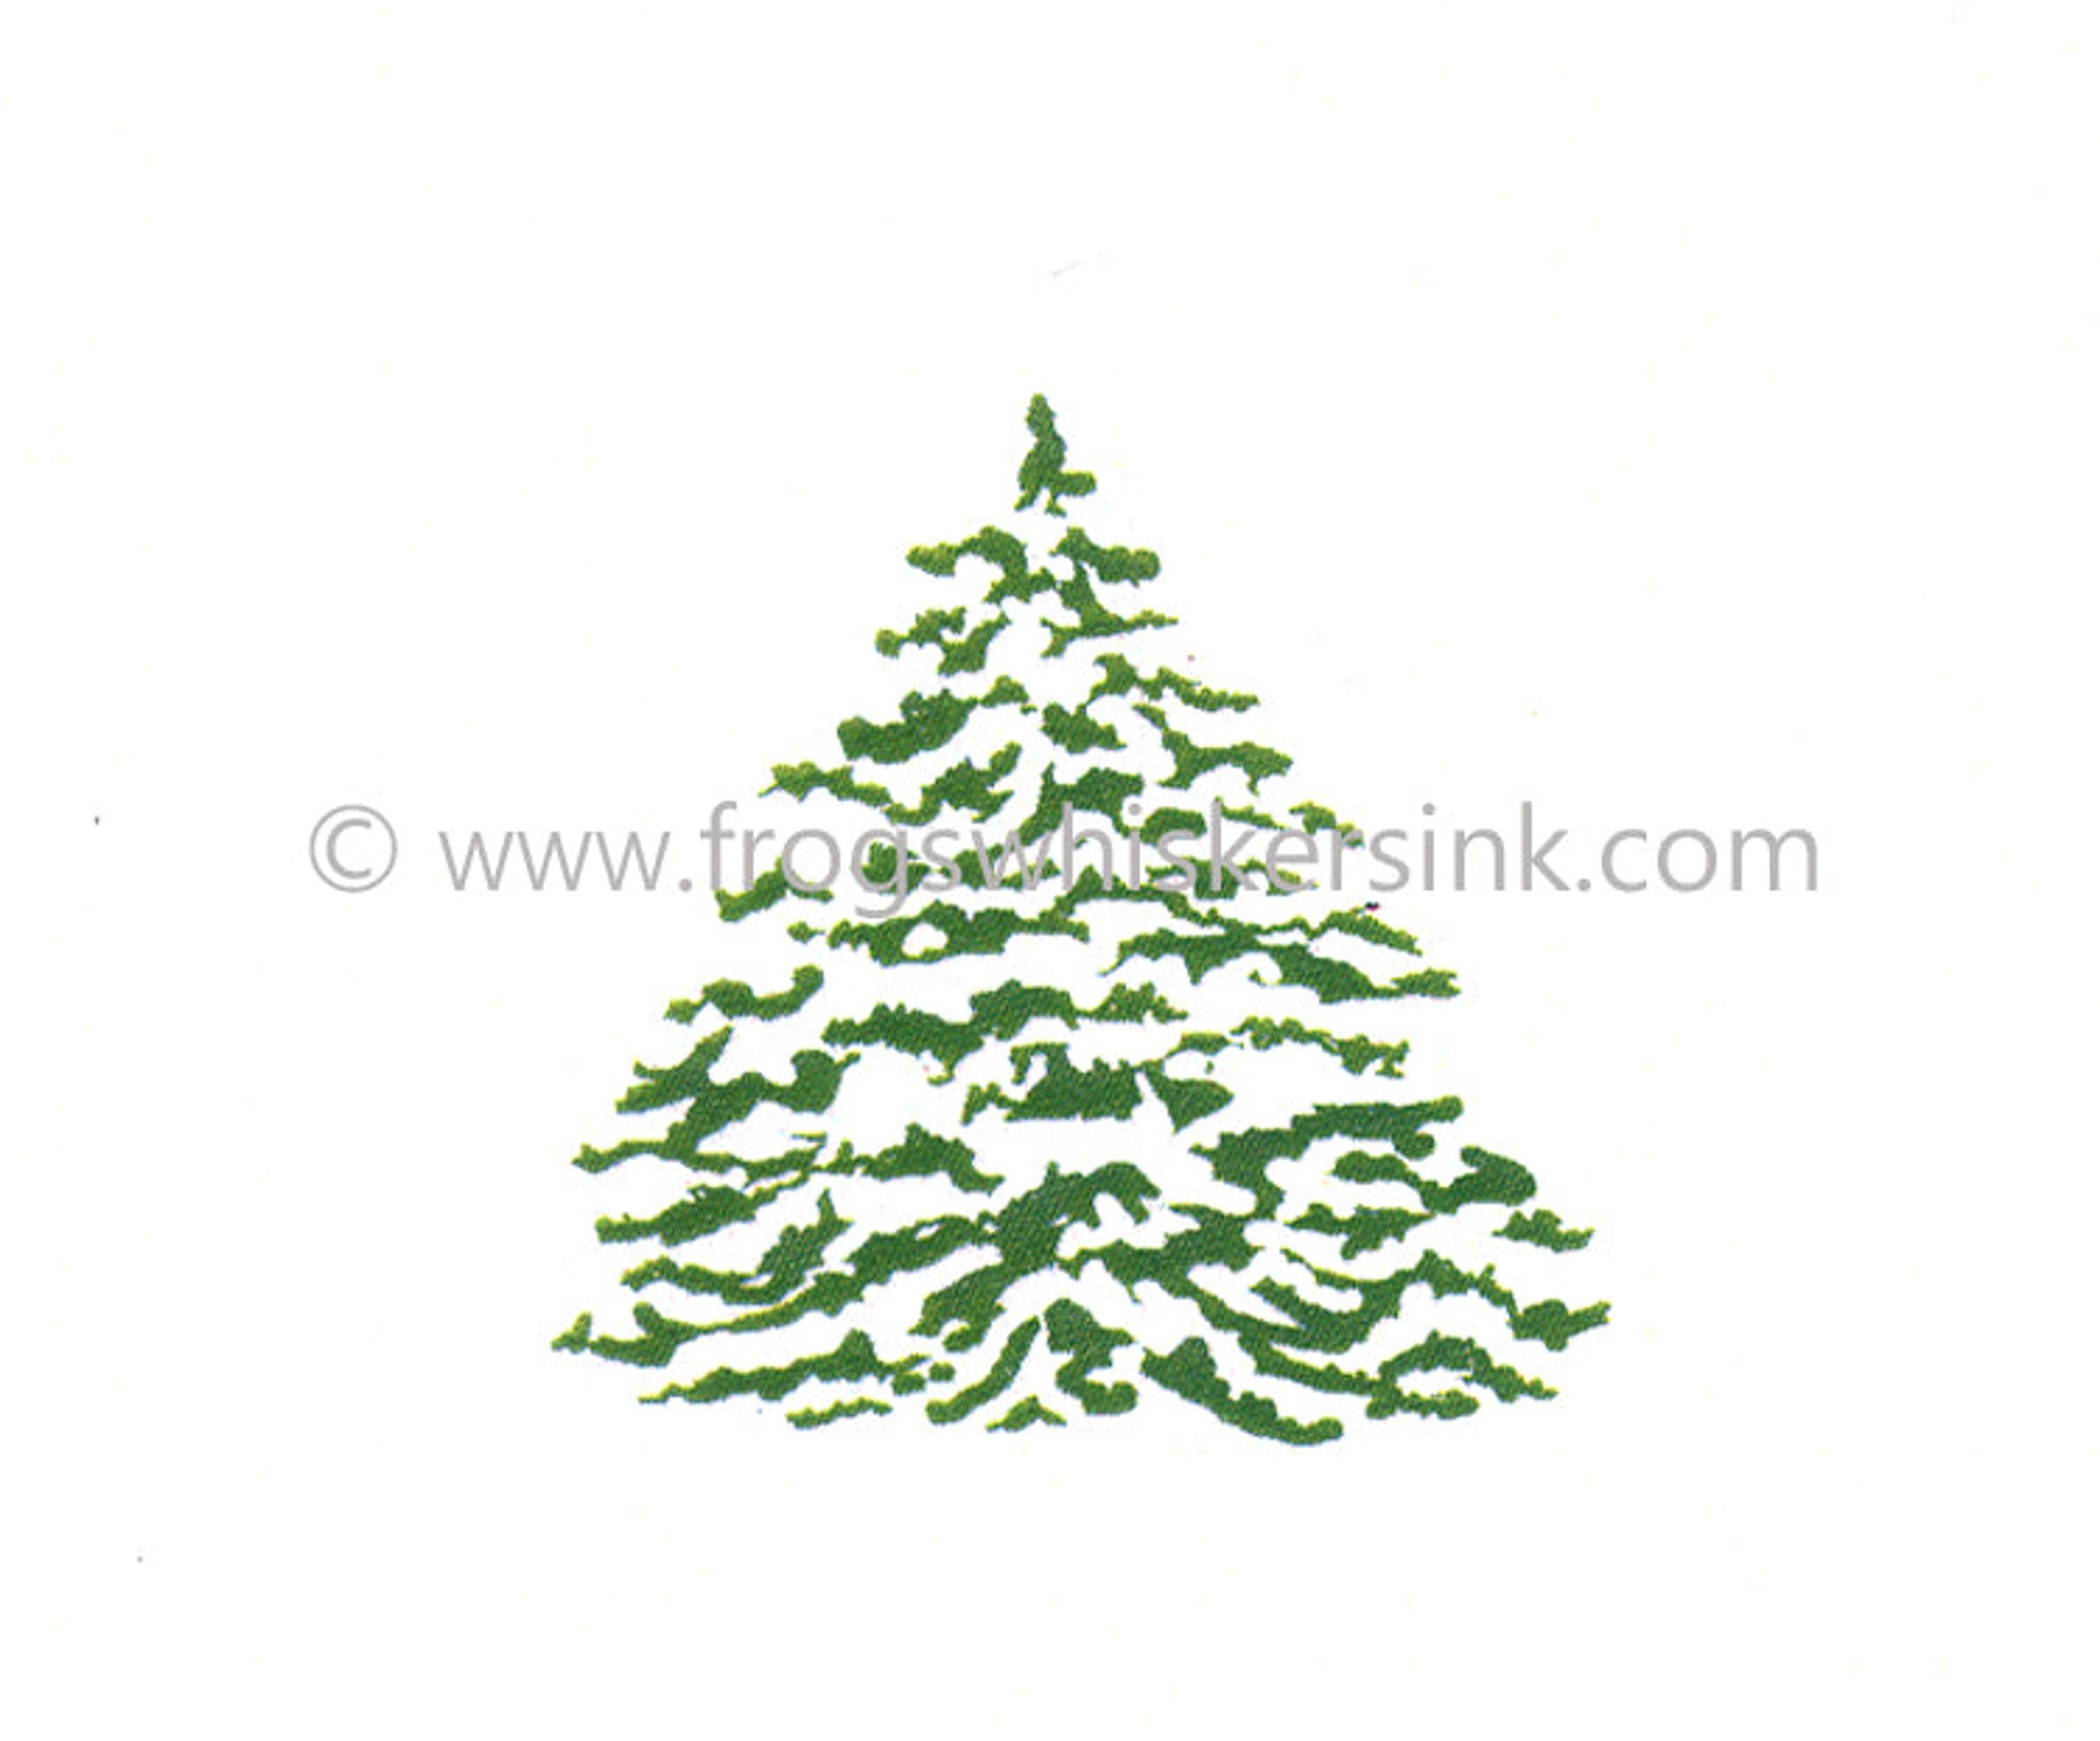 Frog's Whiskers Ink Stamps - Snowy Tree